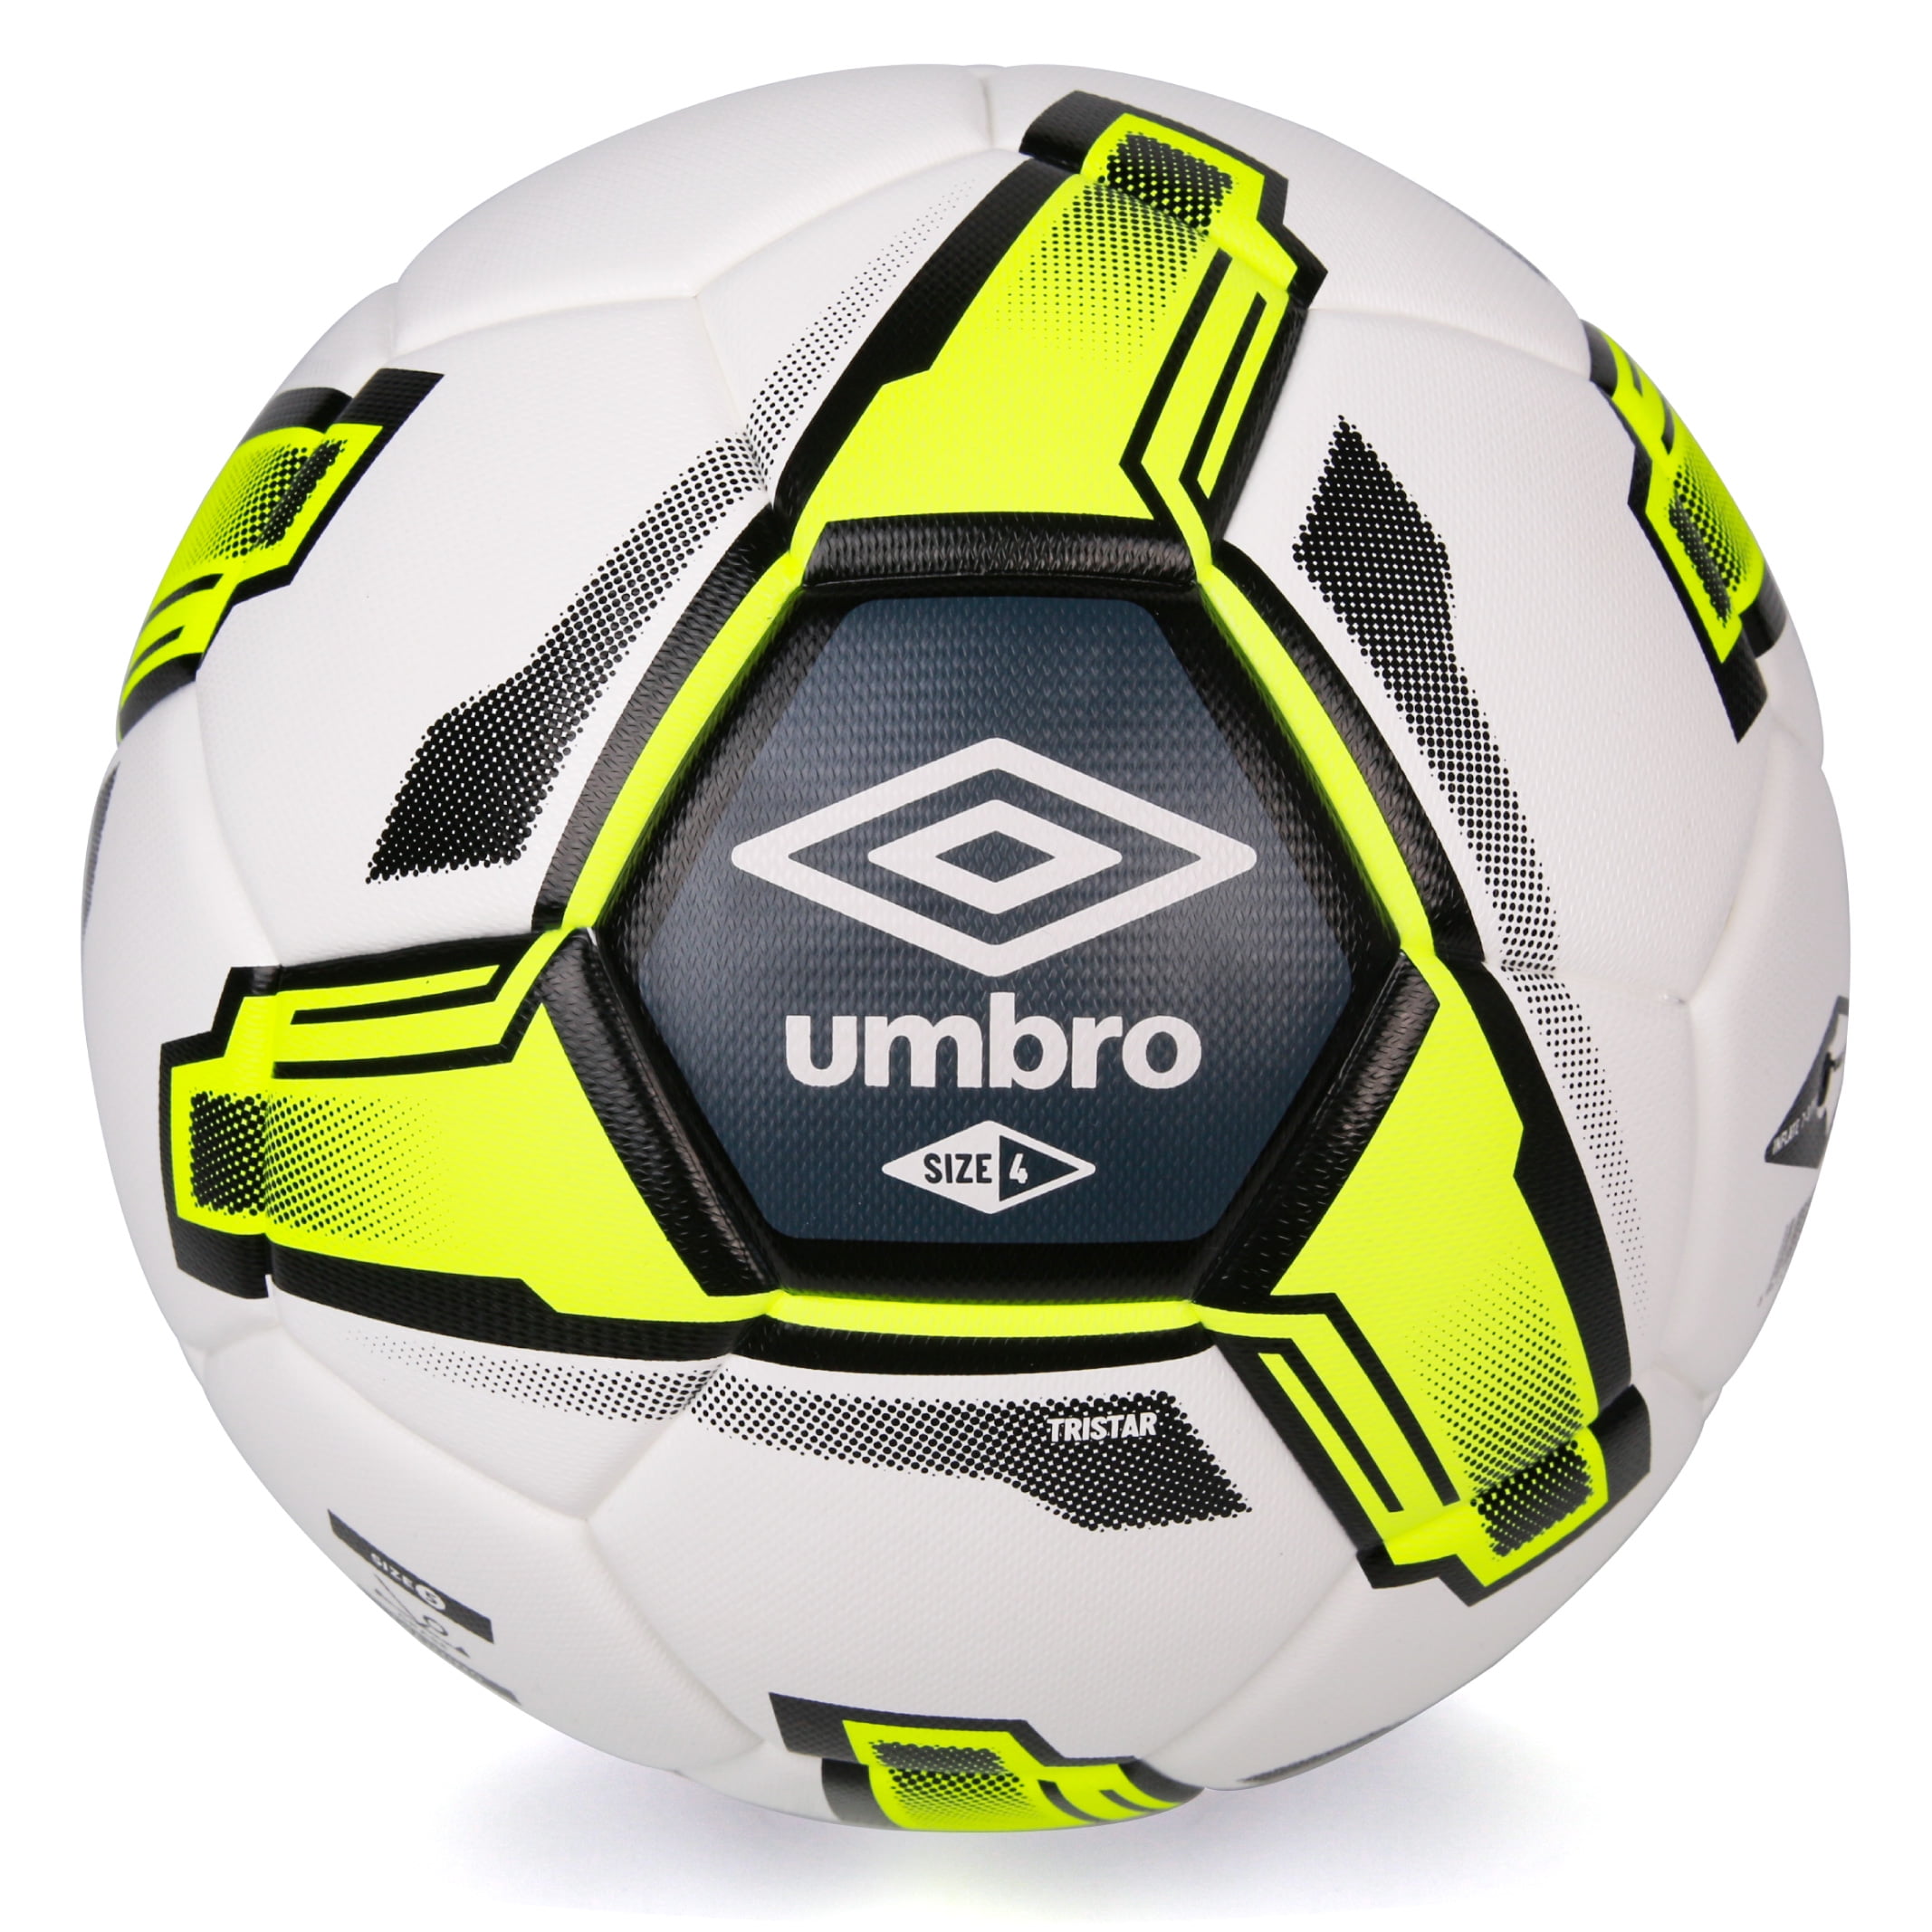 Umbro Tristar Size 4 Youth and Beginner Soccer Ball, White/Black/Yellow